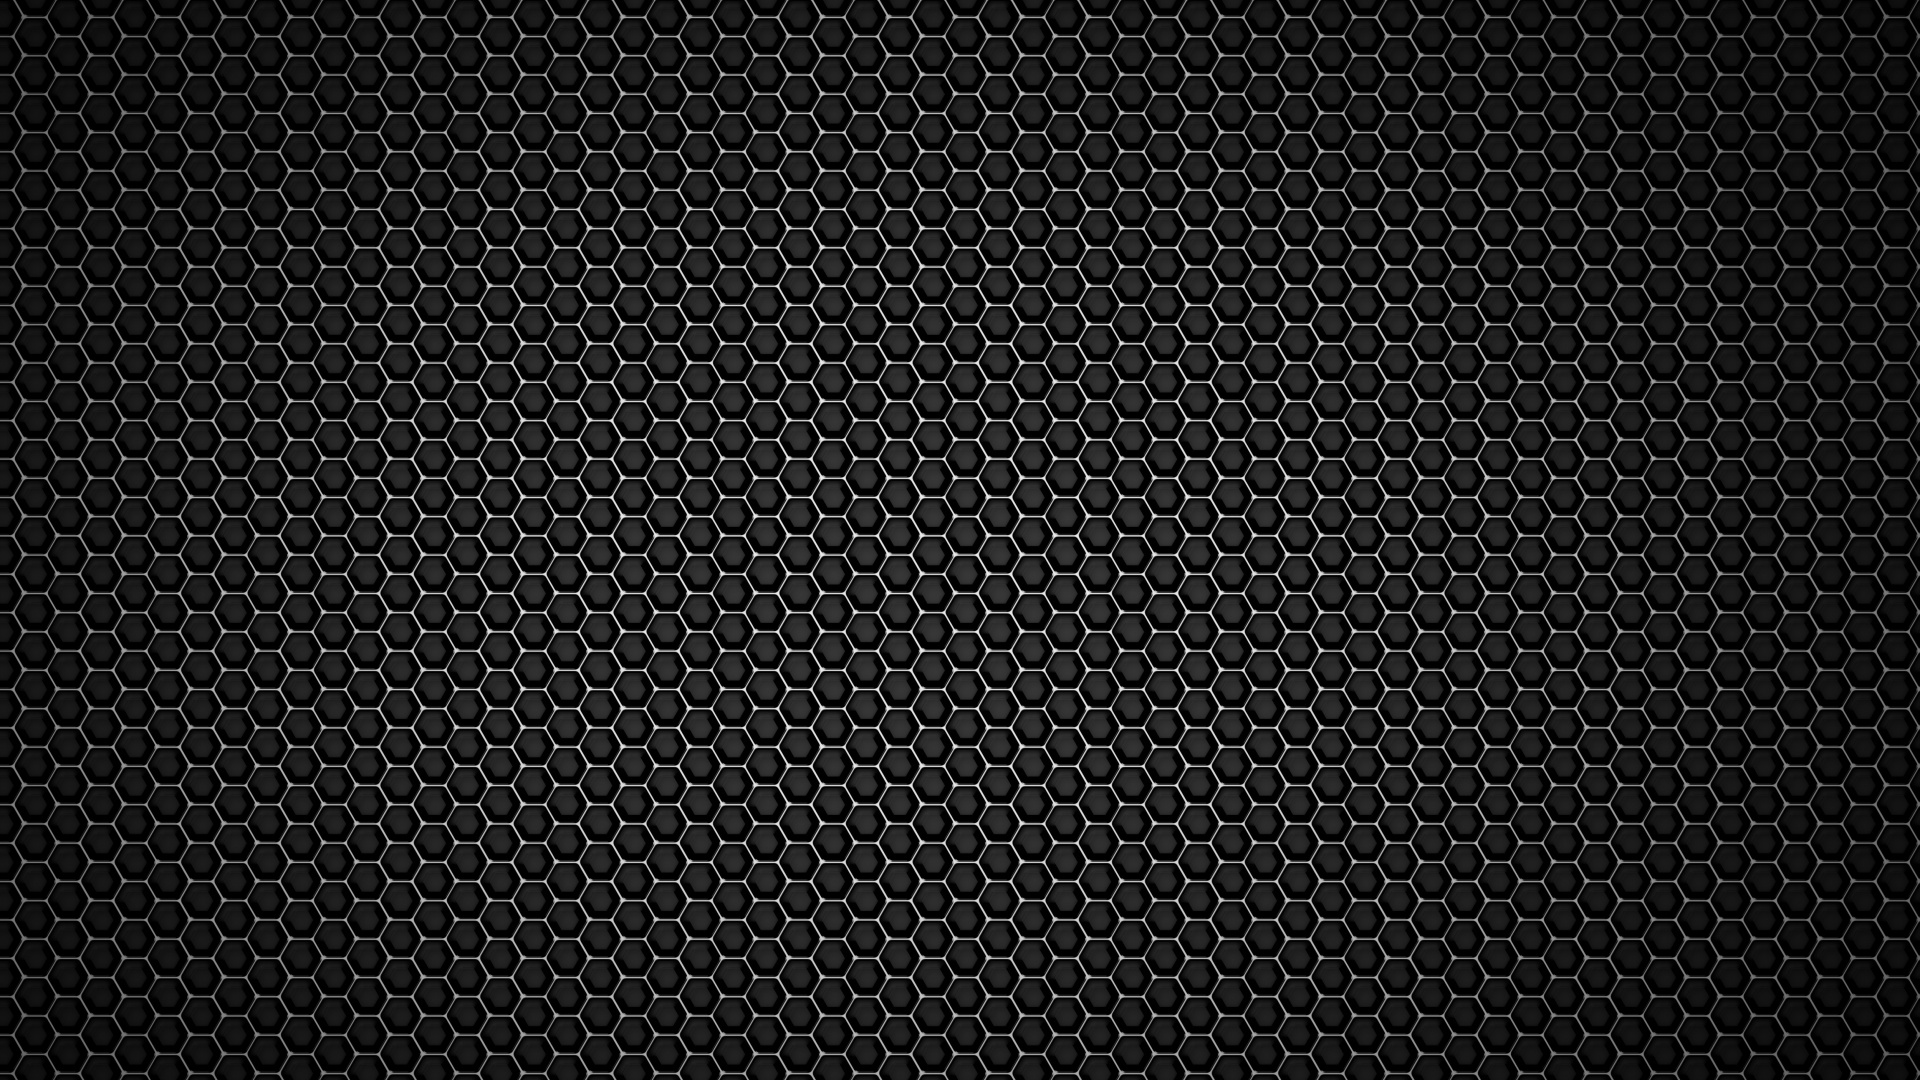 Black and White Checkered Textile. Wallpaper in 1920x1080 Resolution